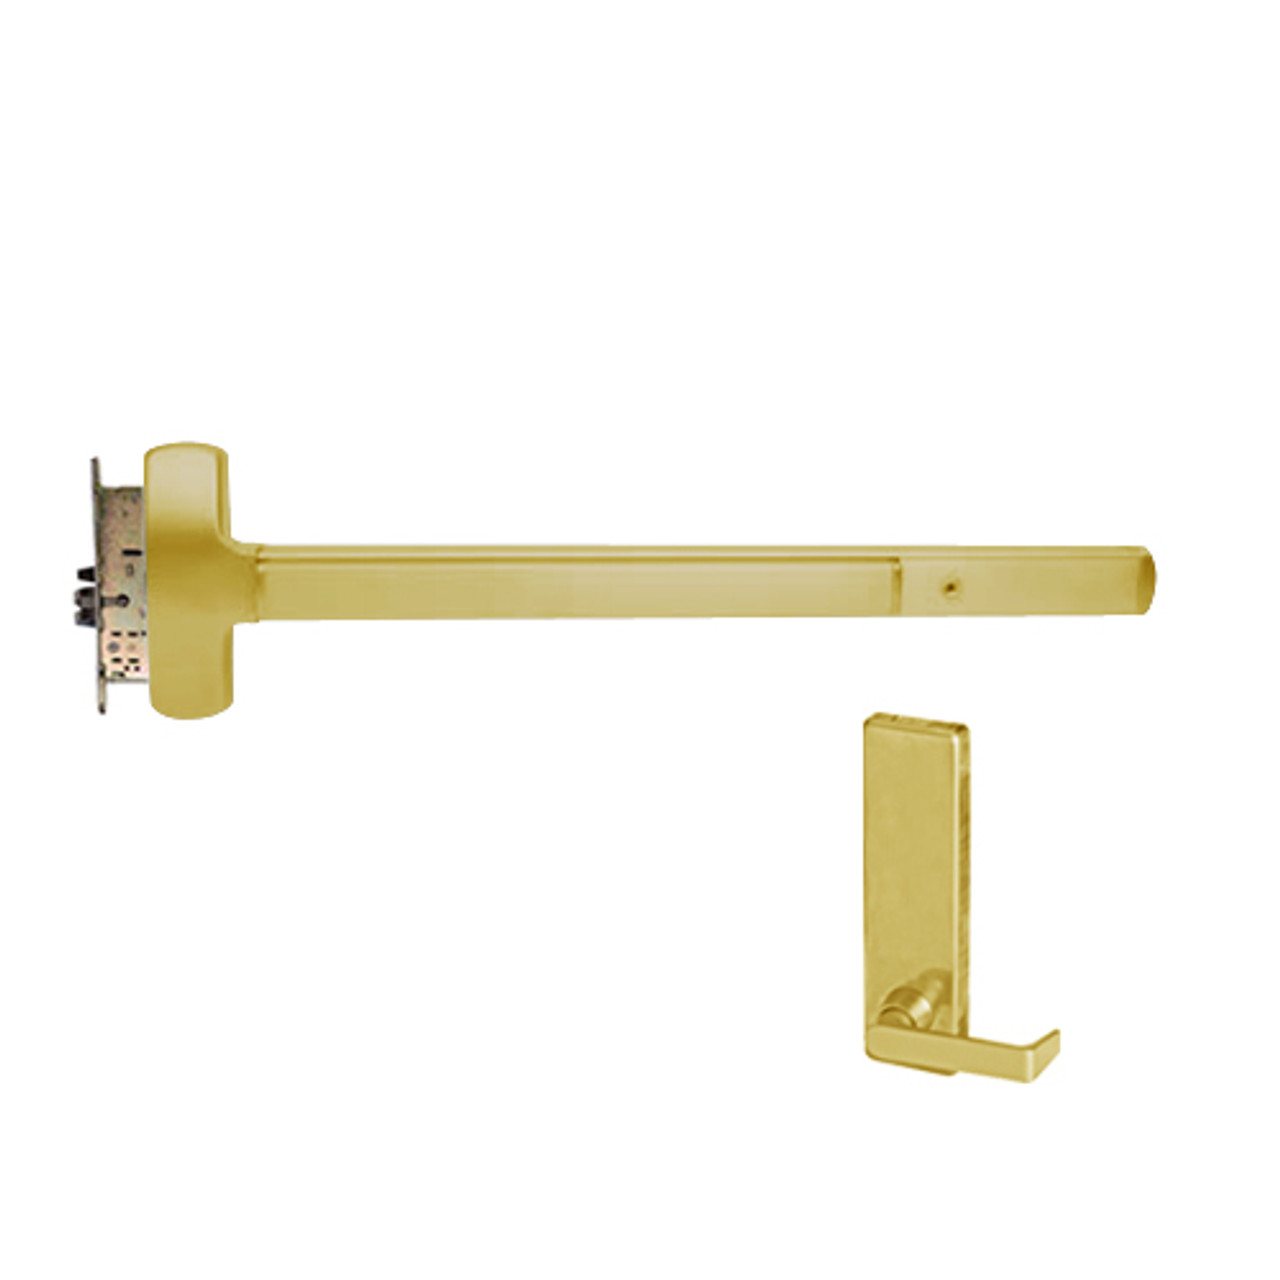 25-M-L-BE-DANE-US3-4-RHR Falcon Exit Device in Polished Brass